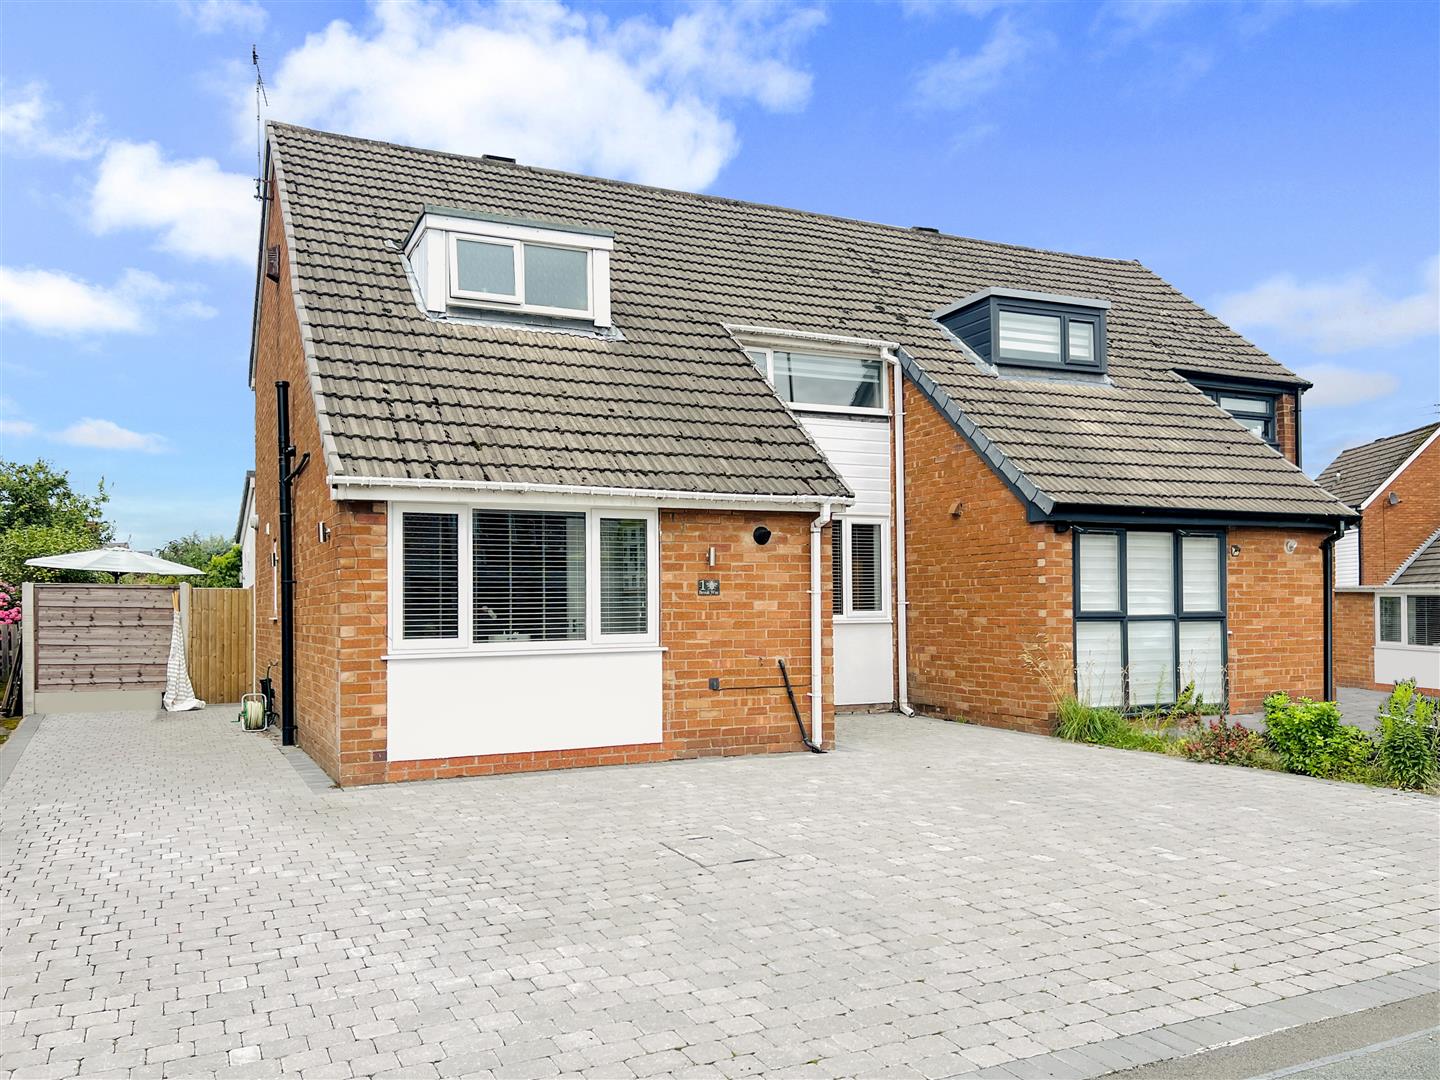 3 bed semi-detached house for sale in Brook Way, Altrincham - Property Image 1